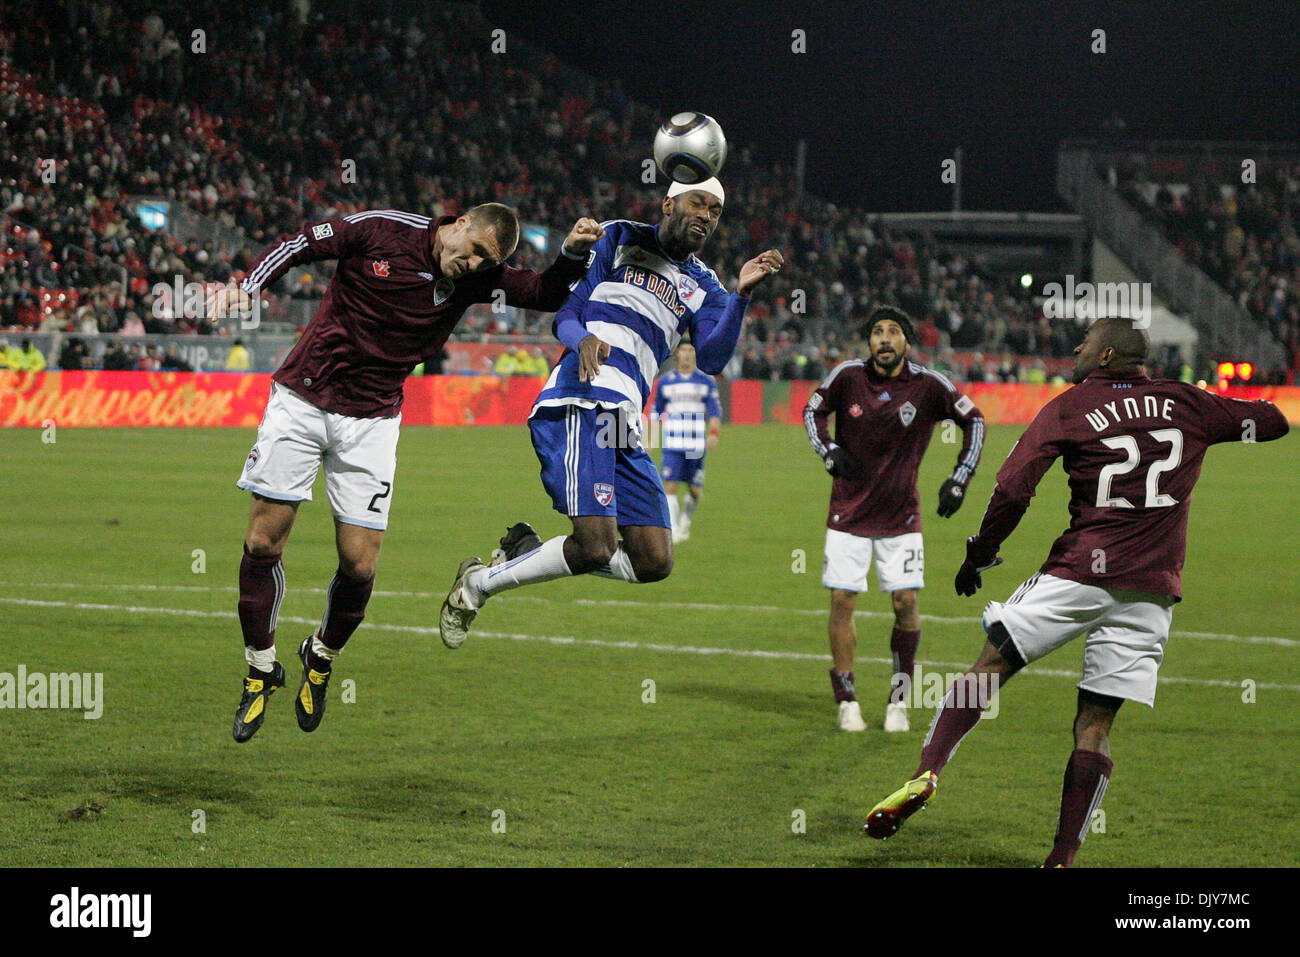 Nov. 21, 2010 - Toronto, Ontario, Canada - Colorado Rapids Defender L (#3) Drew Moore goes for the header against FC Dallas Midfielder R (#18) Marvin Chavez  late in extra-time. The game was played at BMO Field in Toronto, Ontario. The Colorado Rapids defeated FC Dallas 2-1 in extra-time to win the MLS Cup. (Credit Image: © Steve Dormer/Southcreek Global/ZUMAPRESS.com) Stock Photo